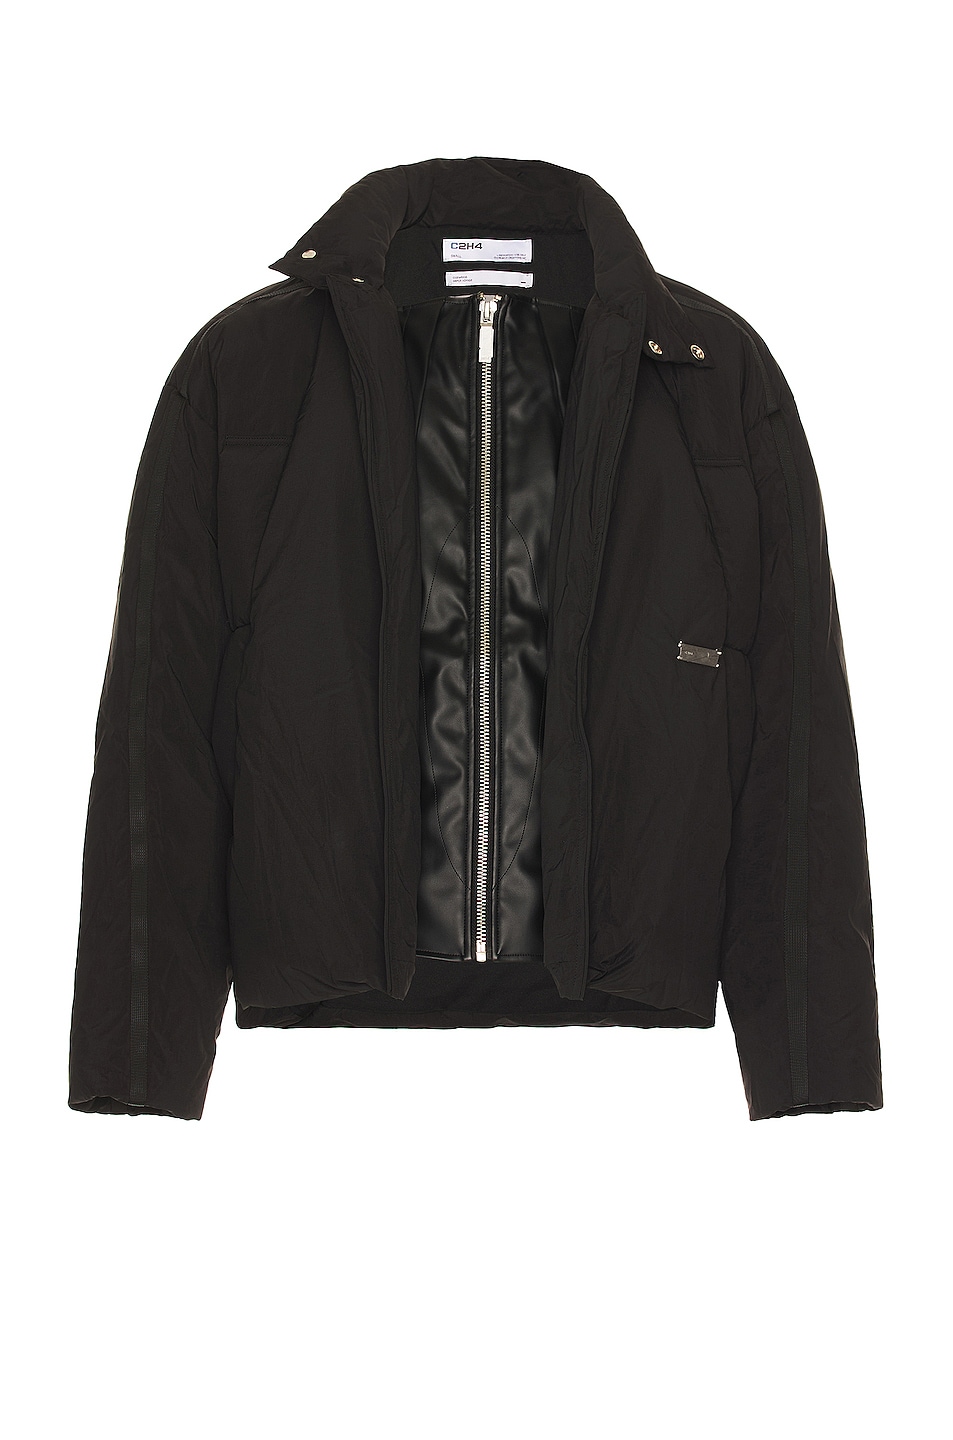 Image 1 of C2H4 Double Placket Down Jacket in Matrix Black